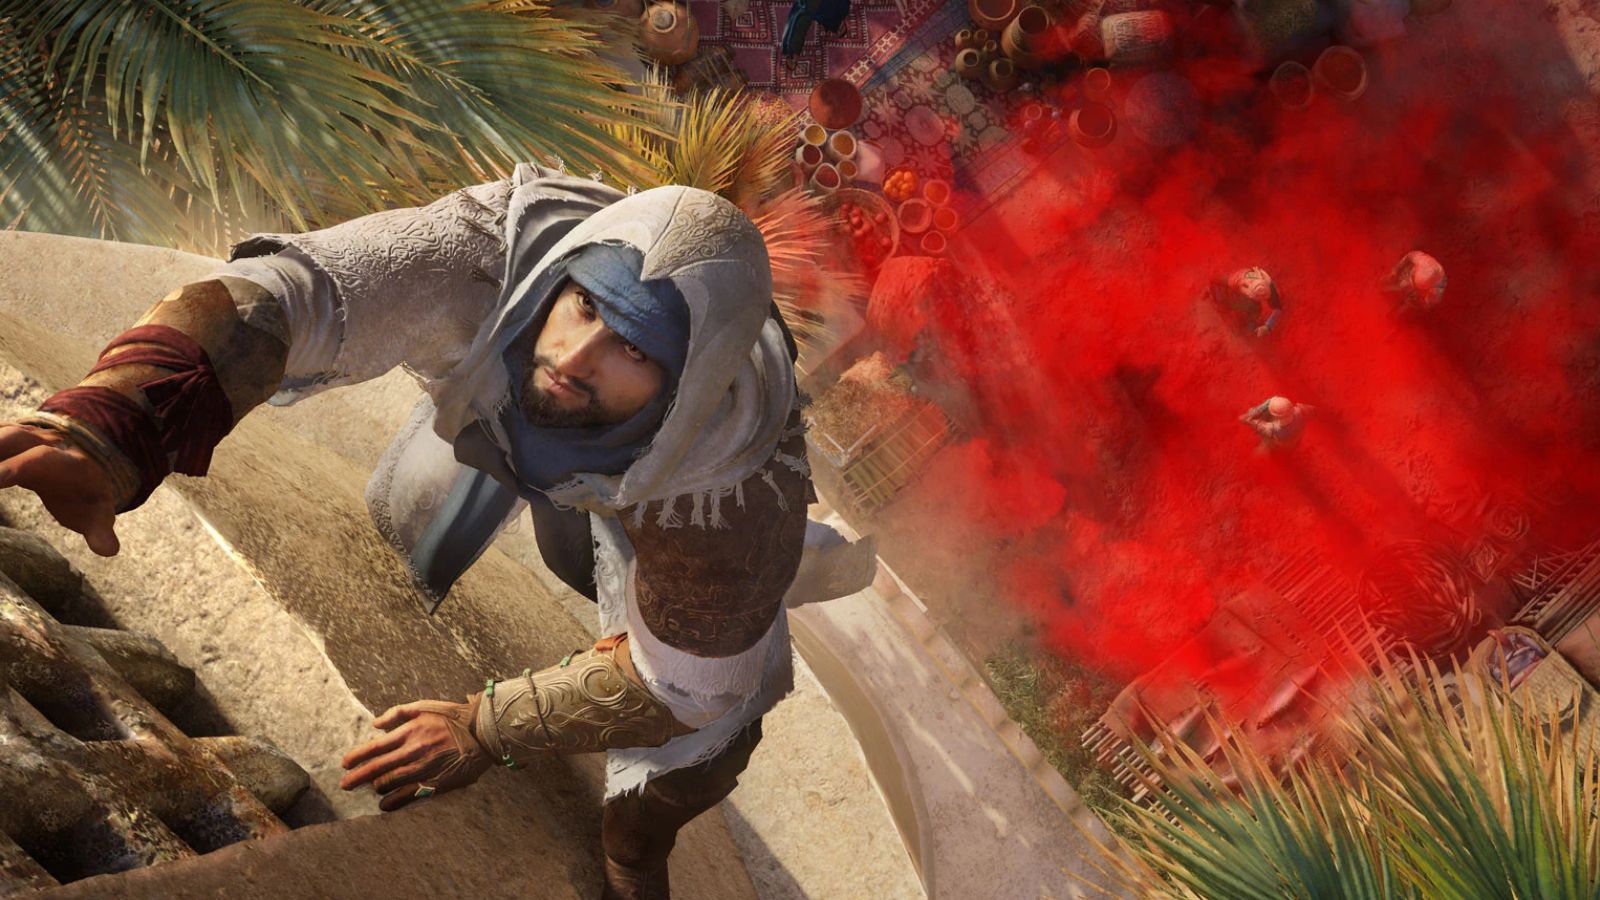 How Long It Takes to Beat Every Assassin's Creed Game